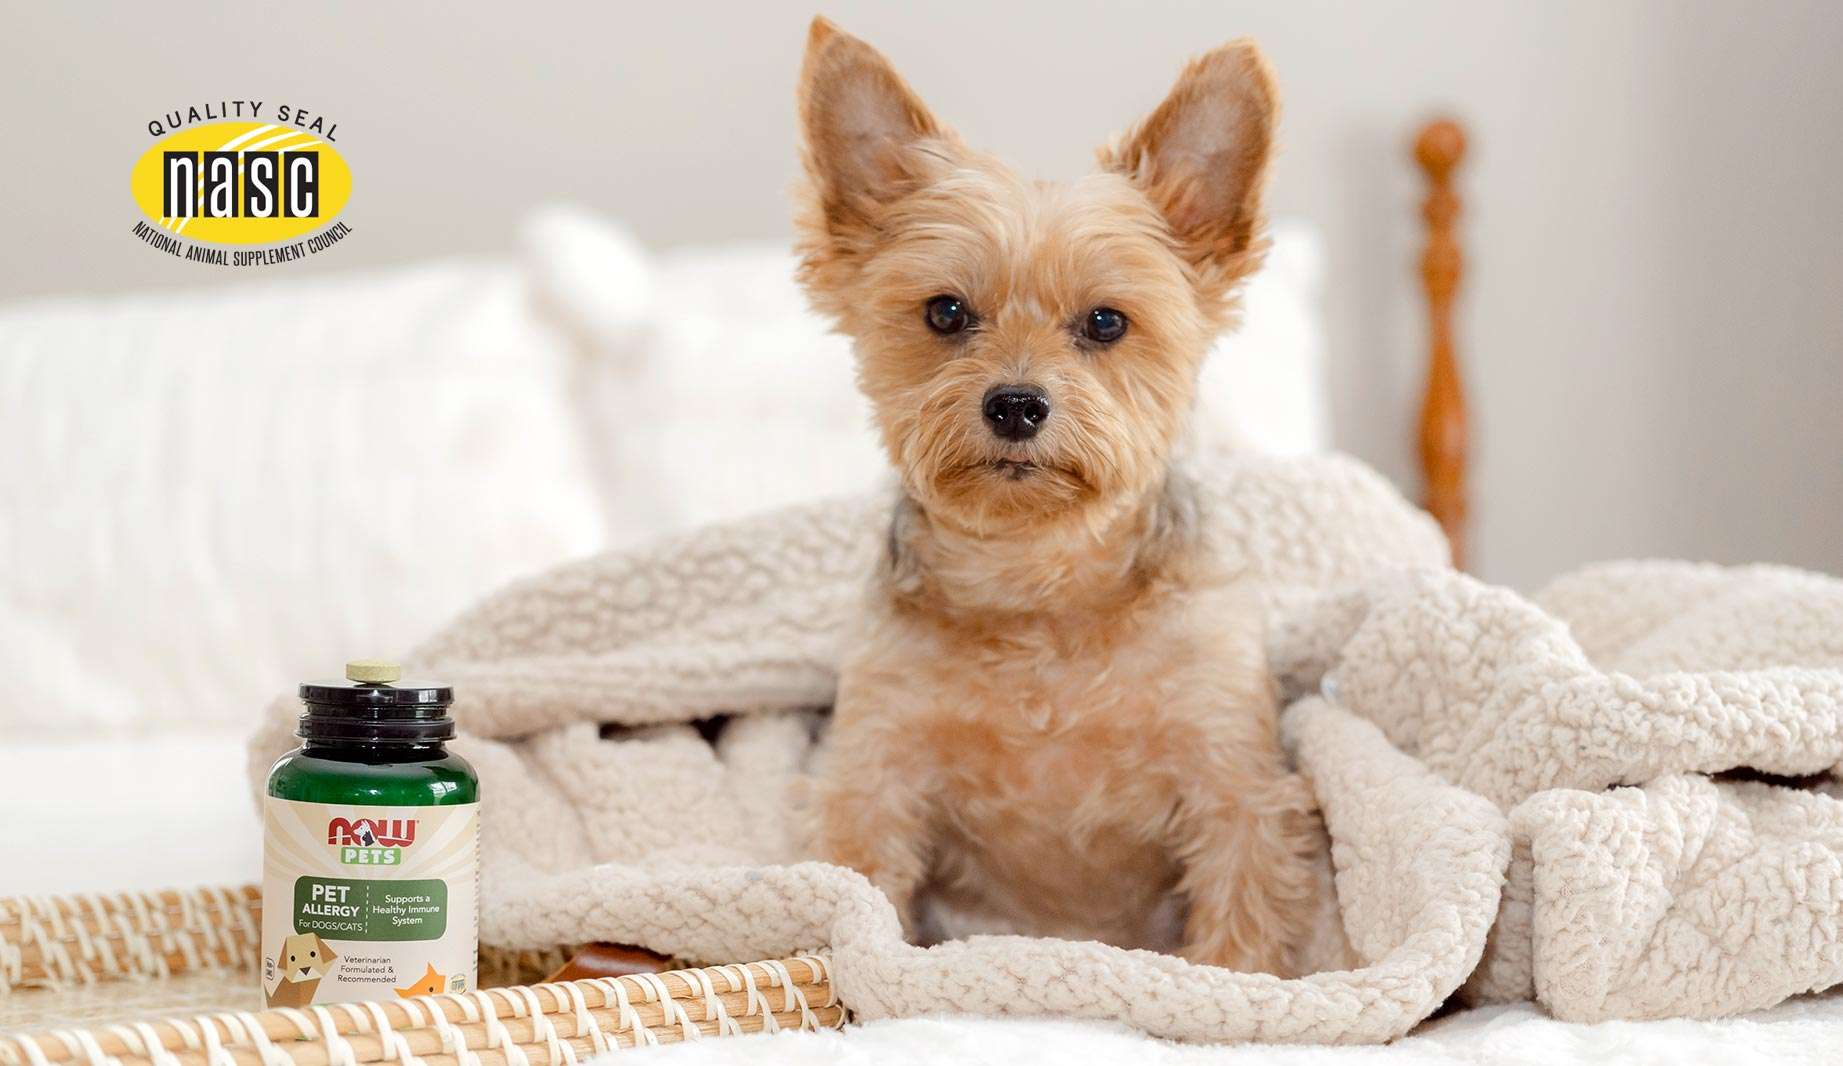 little light brown dog sitting on a bed in blankets with a bottle of NOW Pets Pet Allergy on a tray next to them. NASC Logo Quality Seal National Animal Supplement Council 